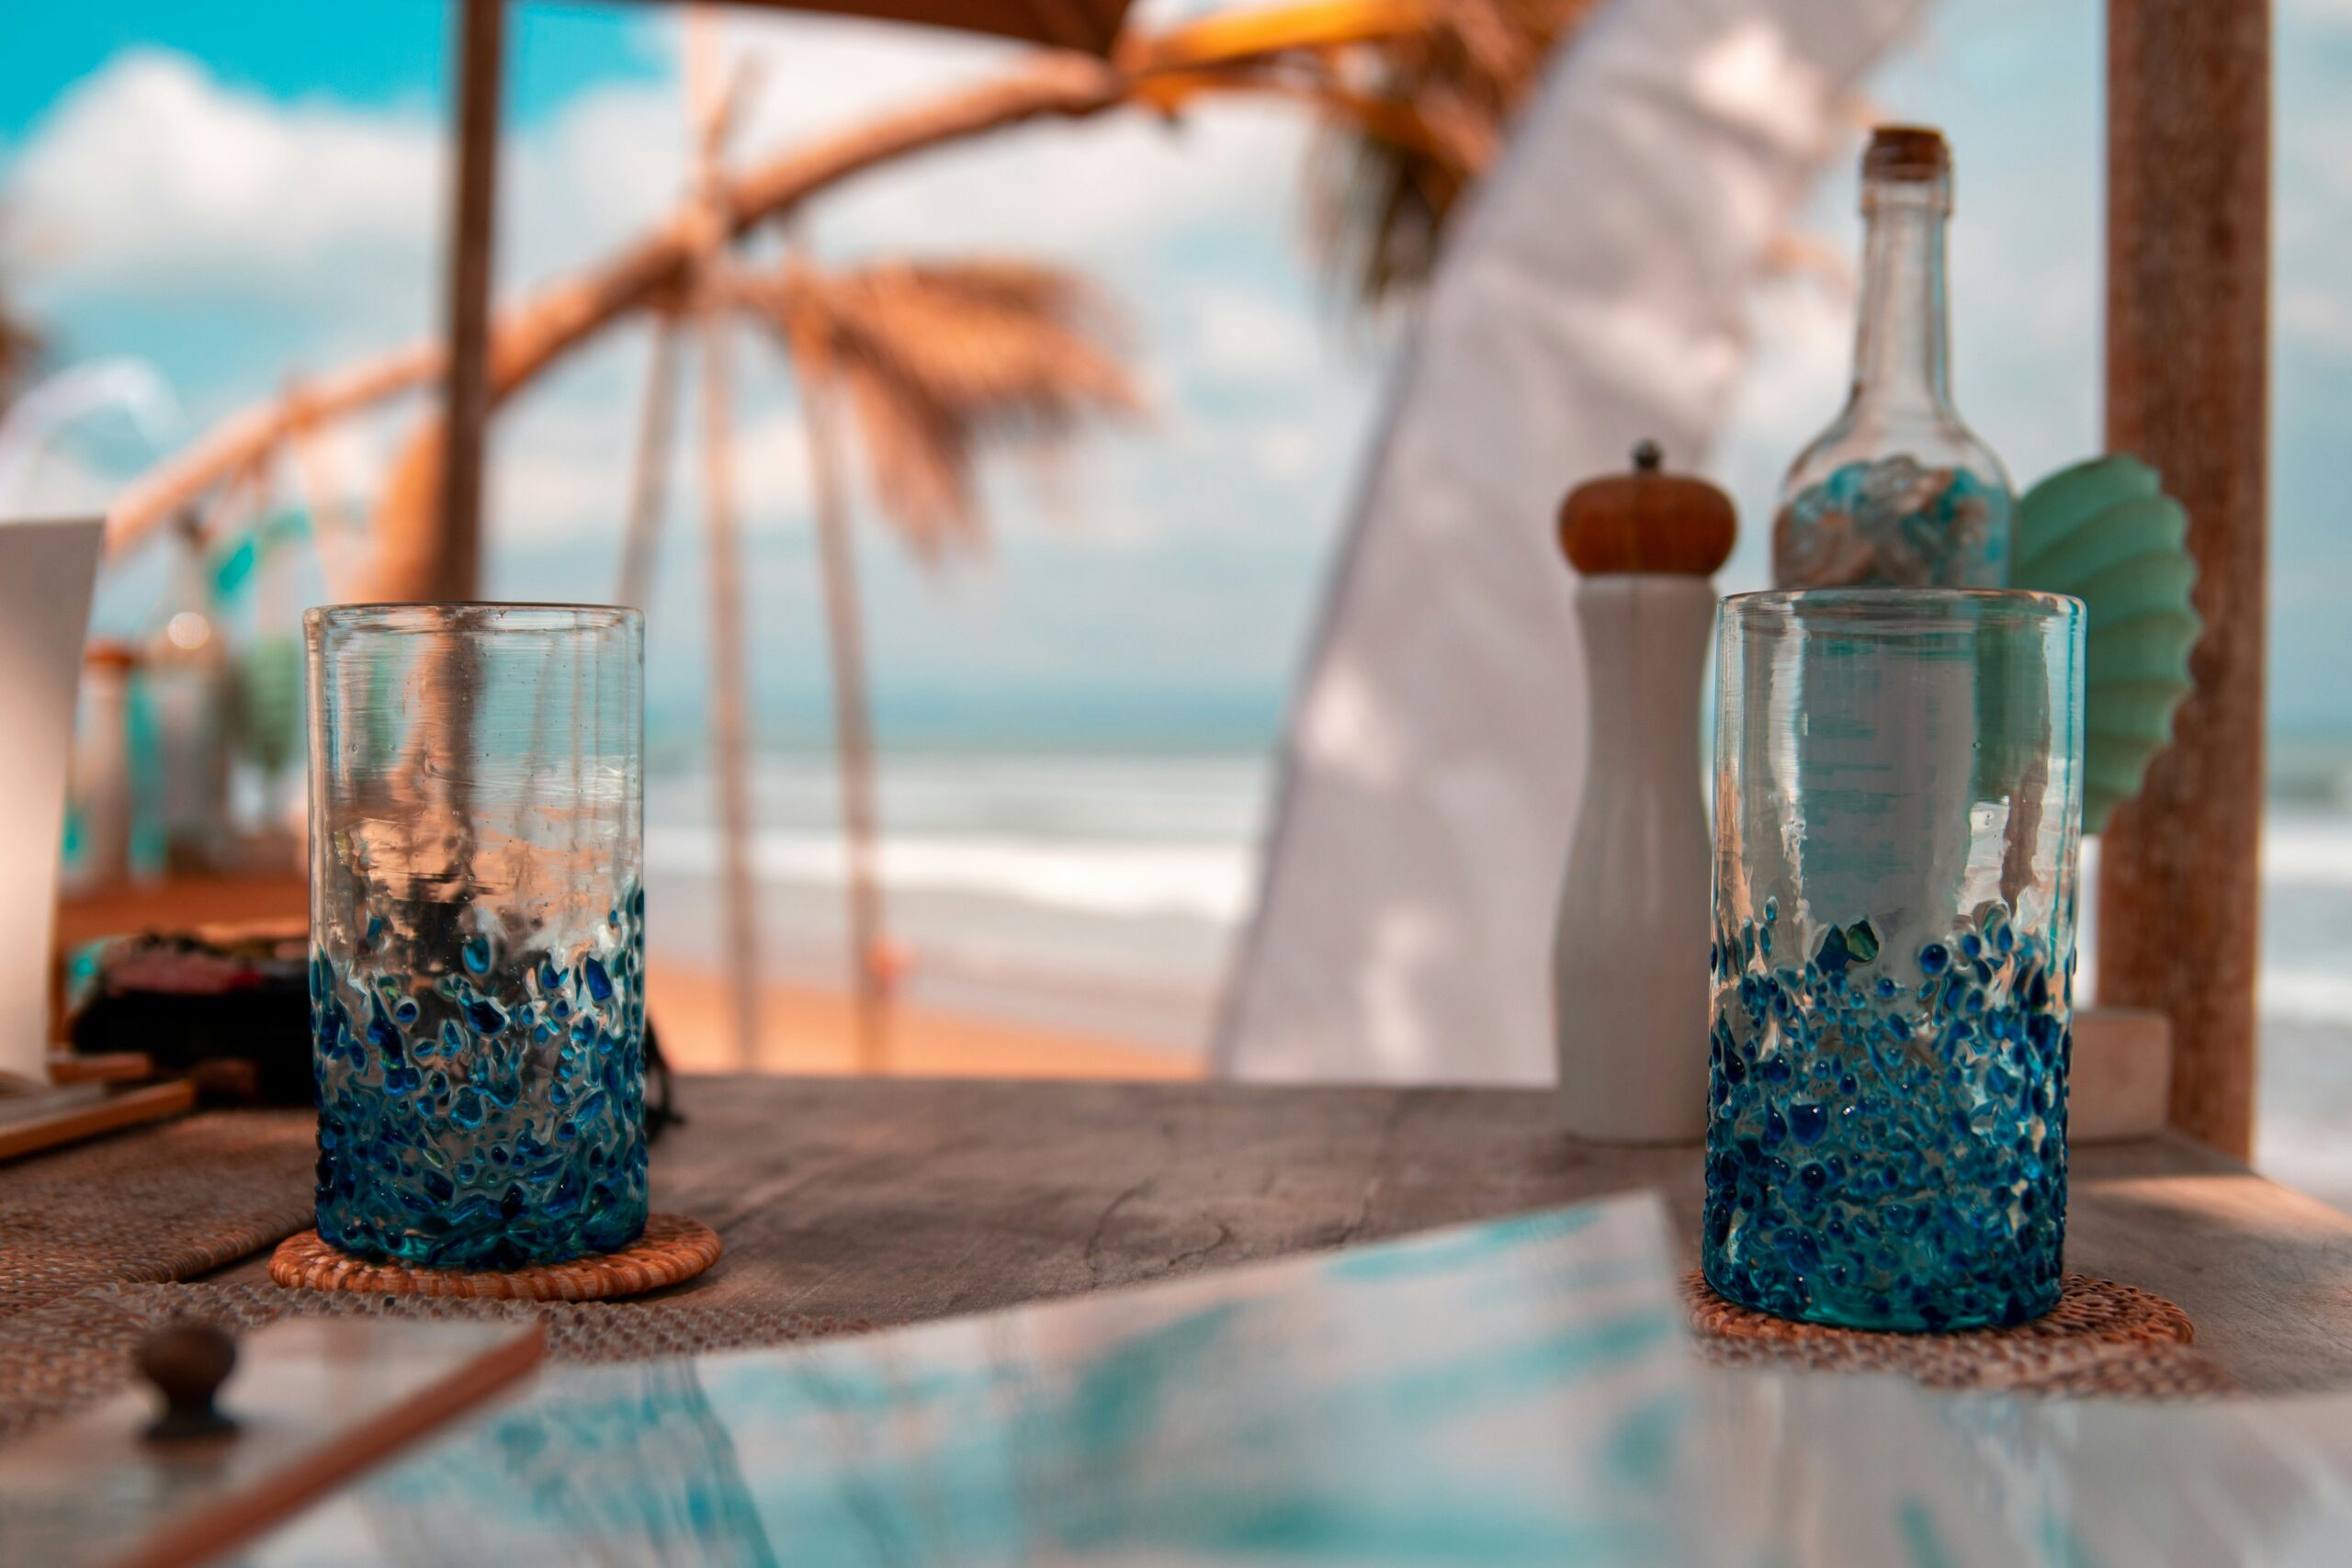 This restaurant in Guadeloupe was a primary filming location for the series “Death in Paradise”.
Pictured: a beach bar counter with decorated glasses  